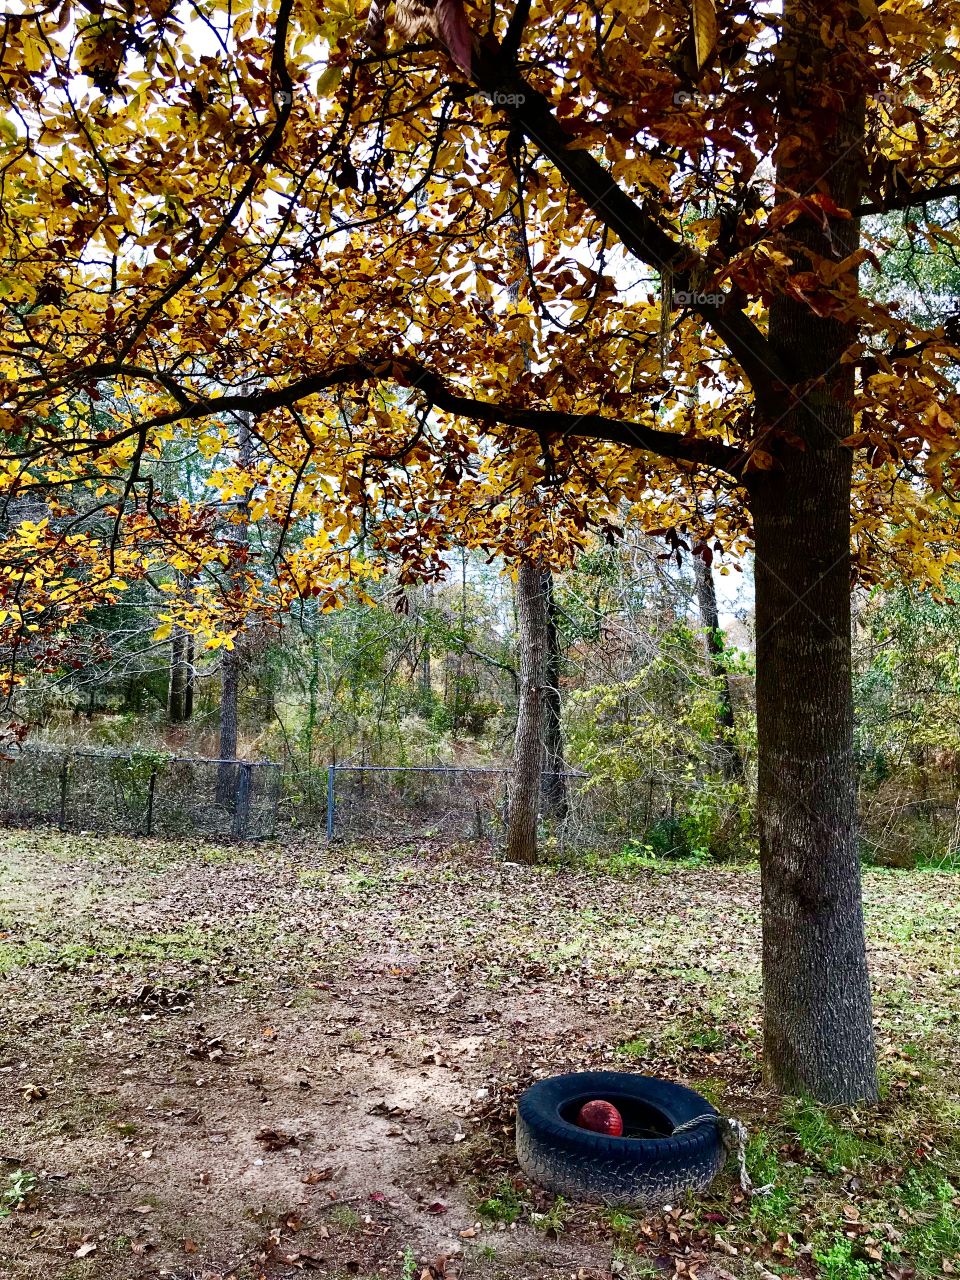 Autumn Leaves and Grounded Tire Swing